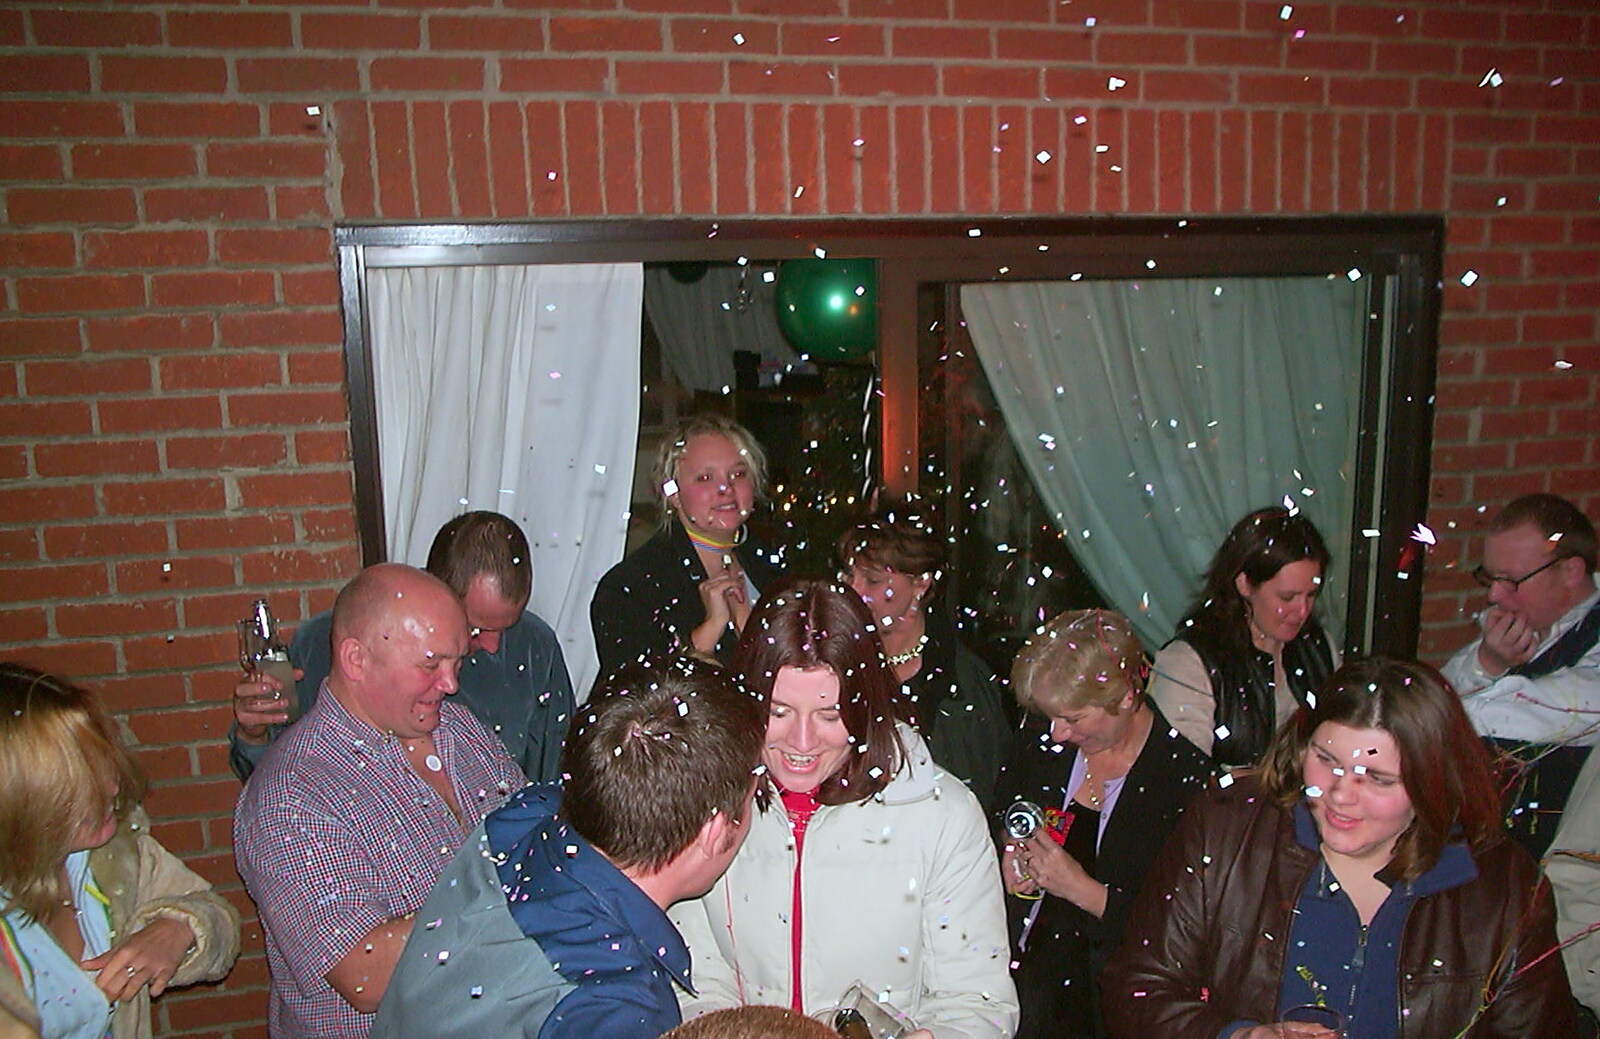 There's confetti in the air from A 3G Lab New Year at Michelle's, St Ives, Cambridgeshire - 31st December 2001